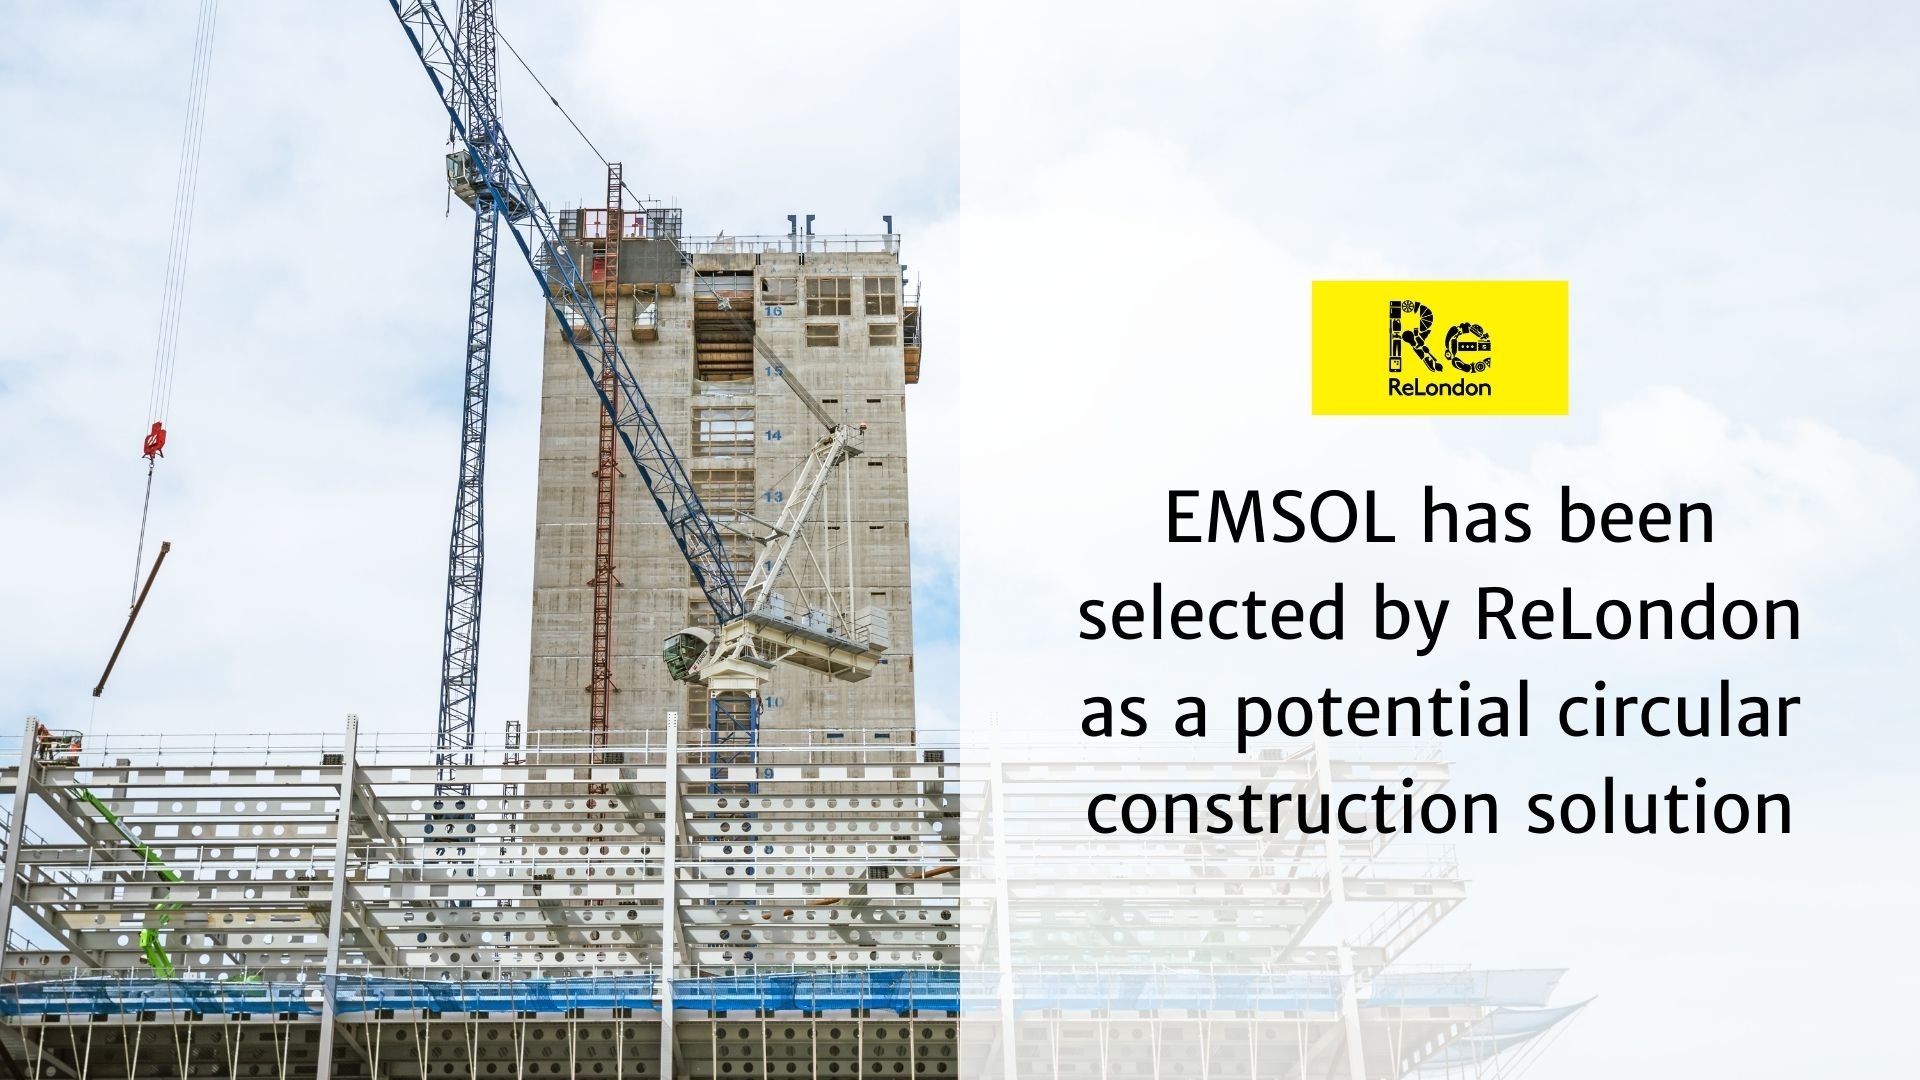 EMSOL has been selected by ReLondon as a potential circular construction solution